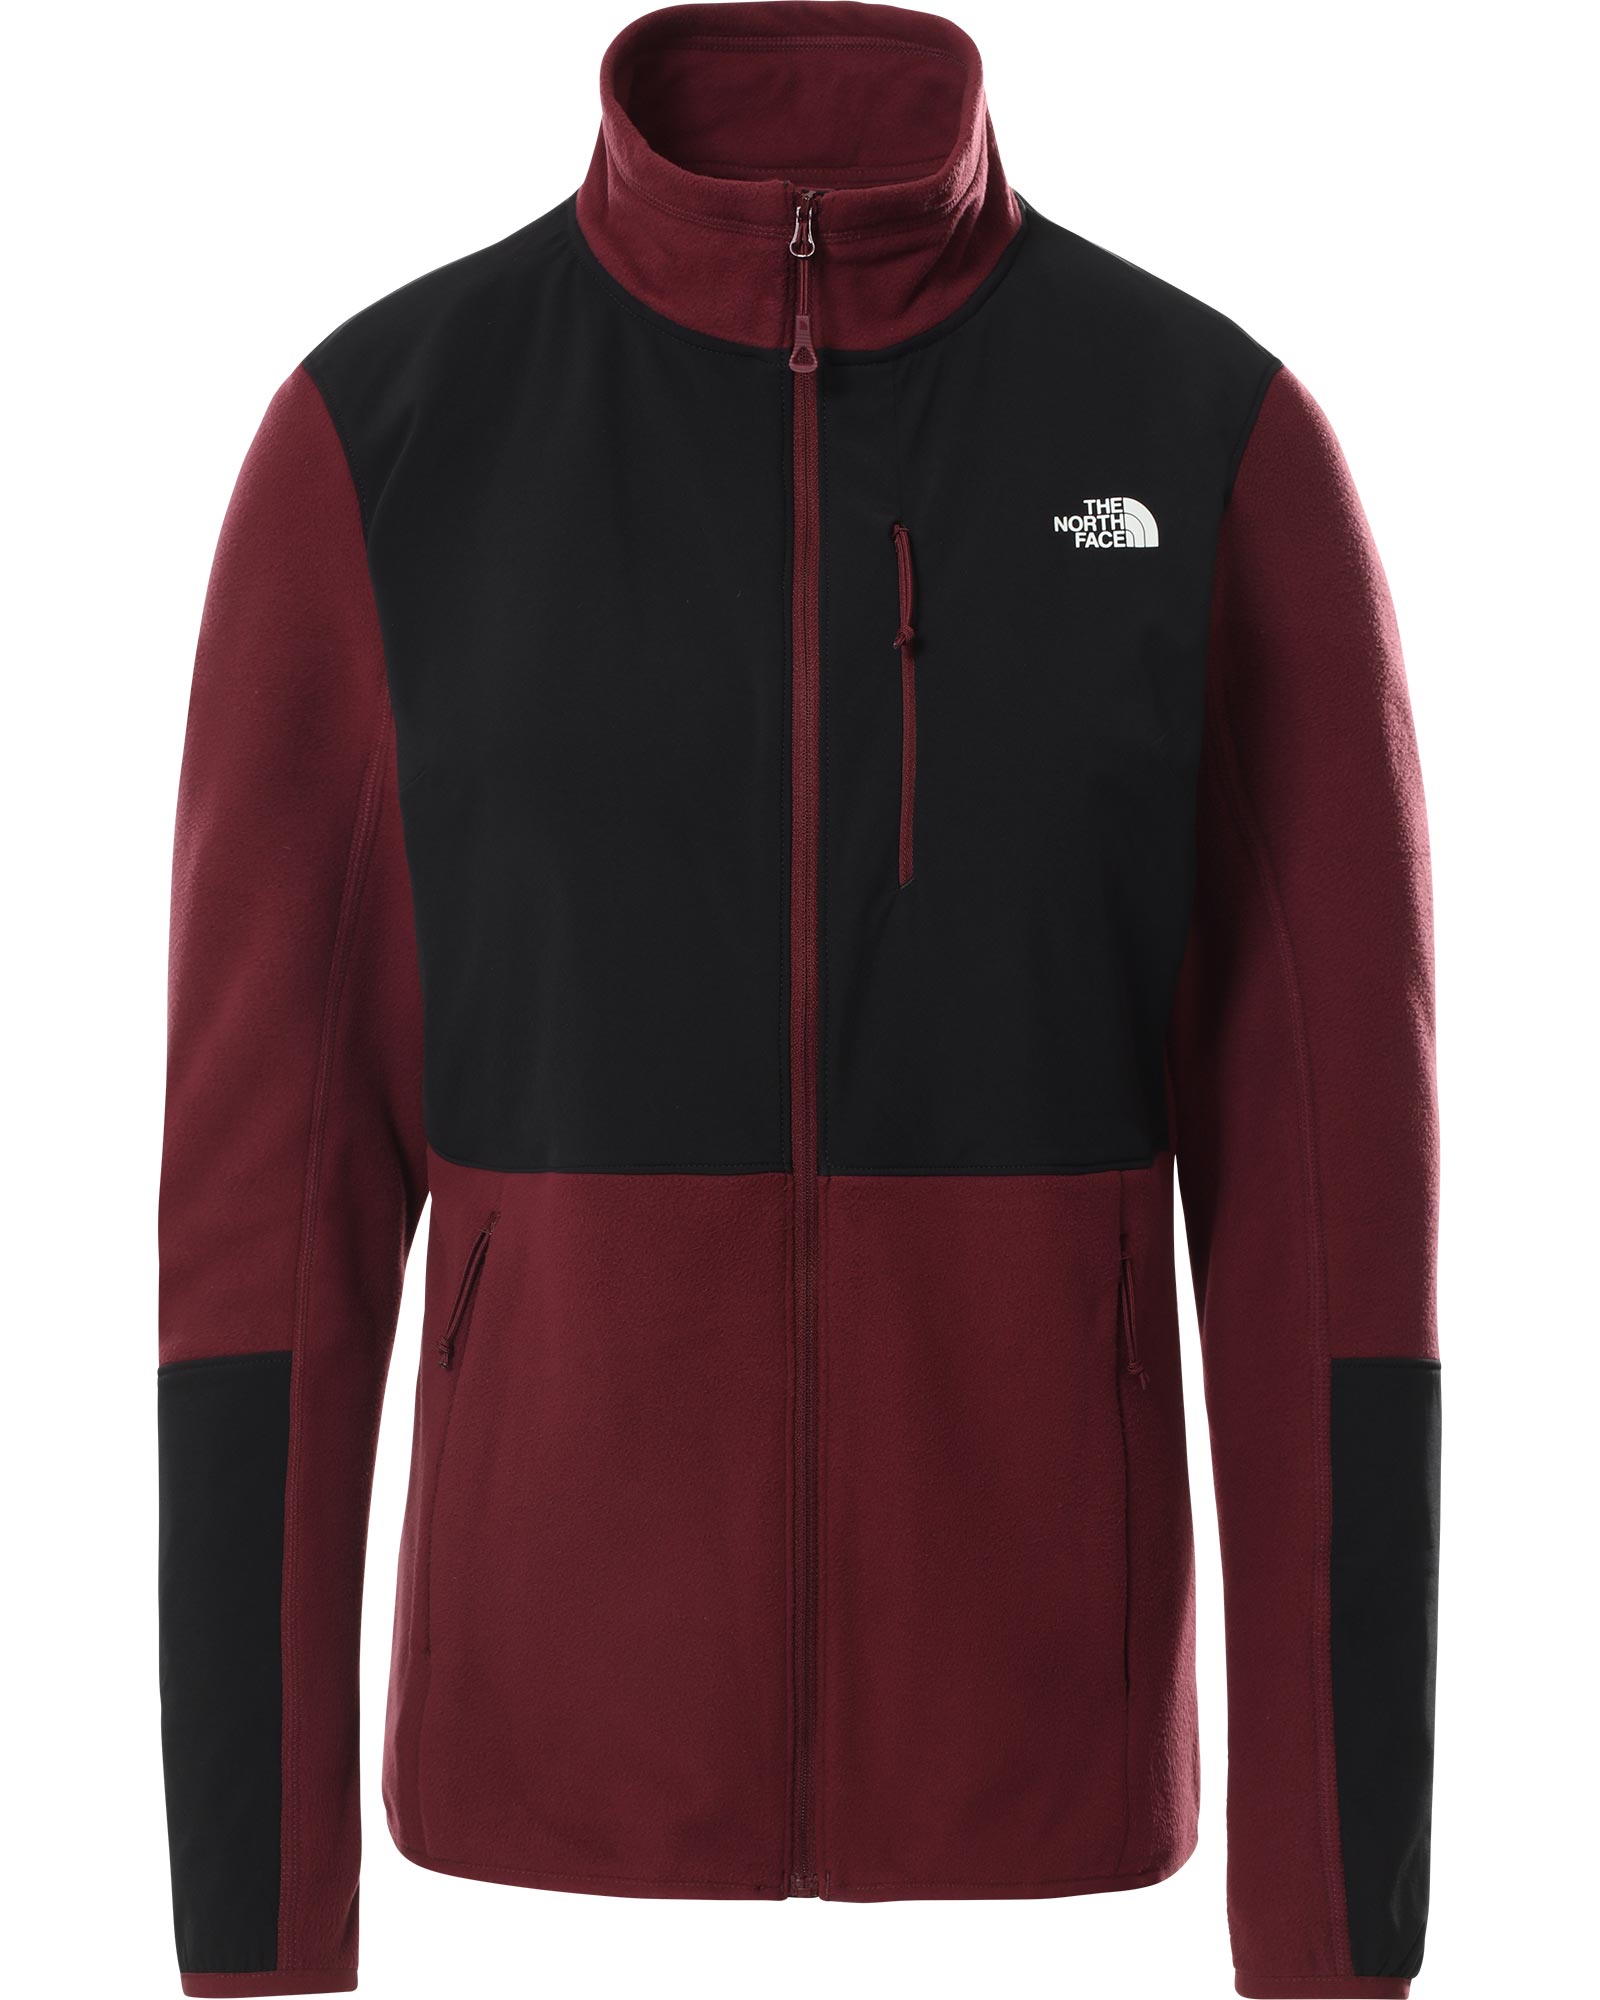 The North Face Diablo Women’s Mid Layer Jacket - Regal Red L